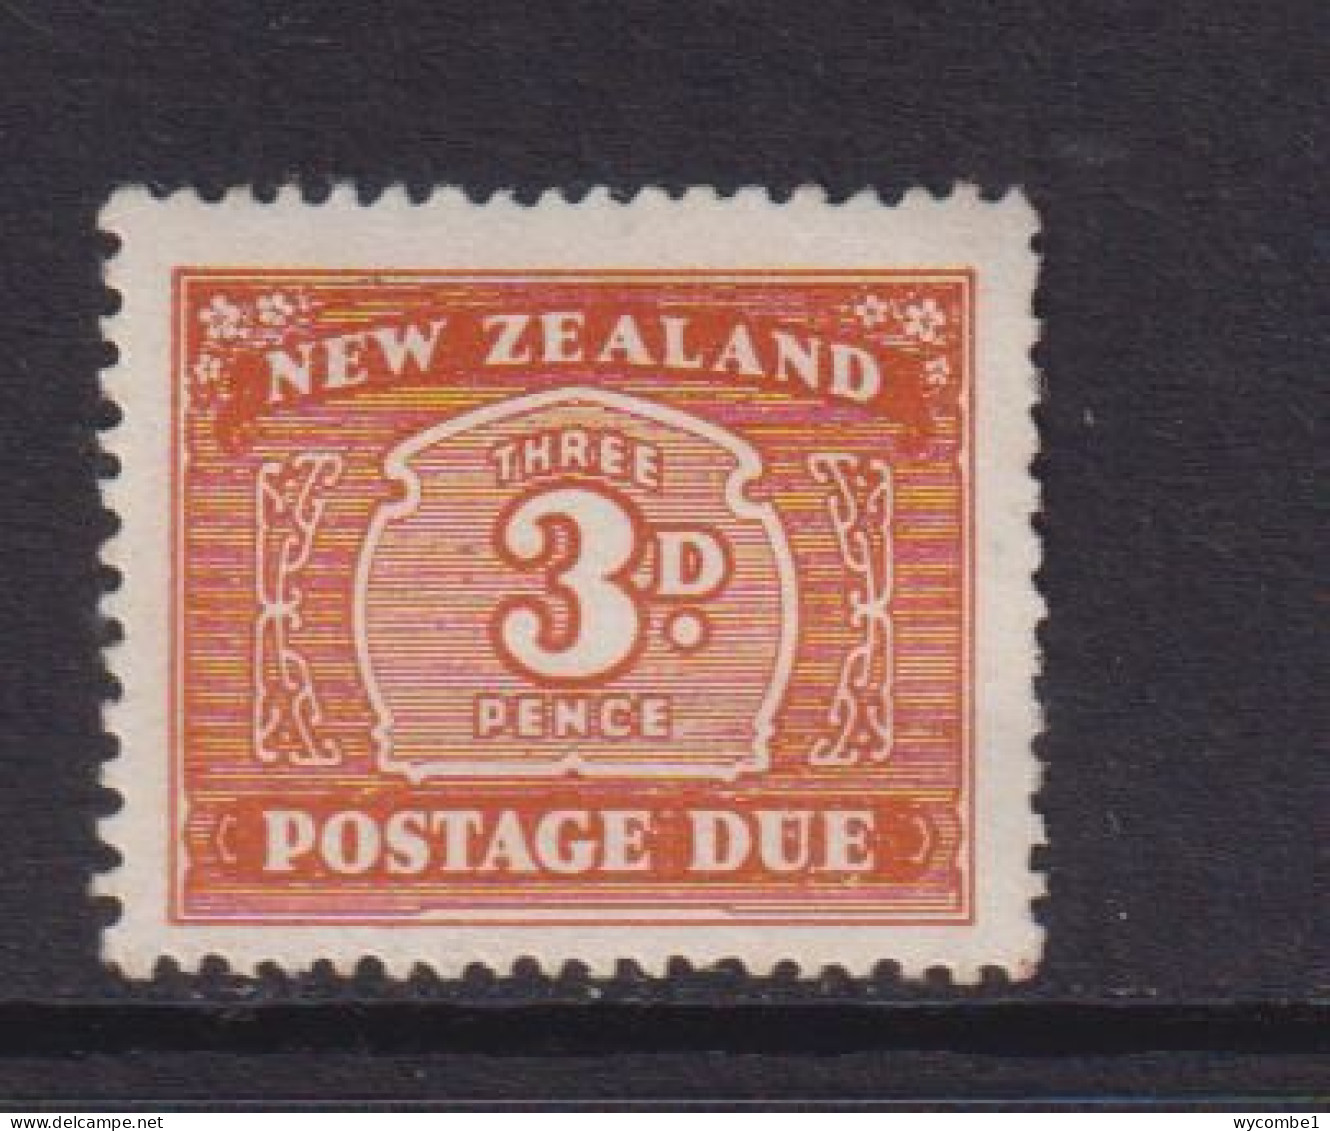 NEW ZEALAND  - 1939 Postage Due 3d Hinged Mint - Postage Due